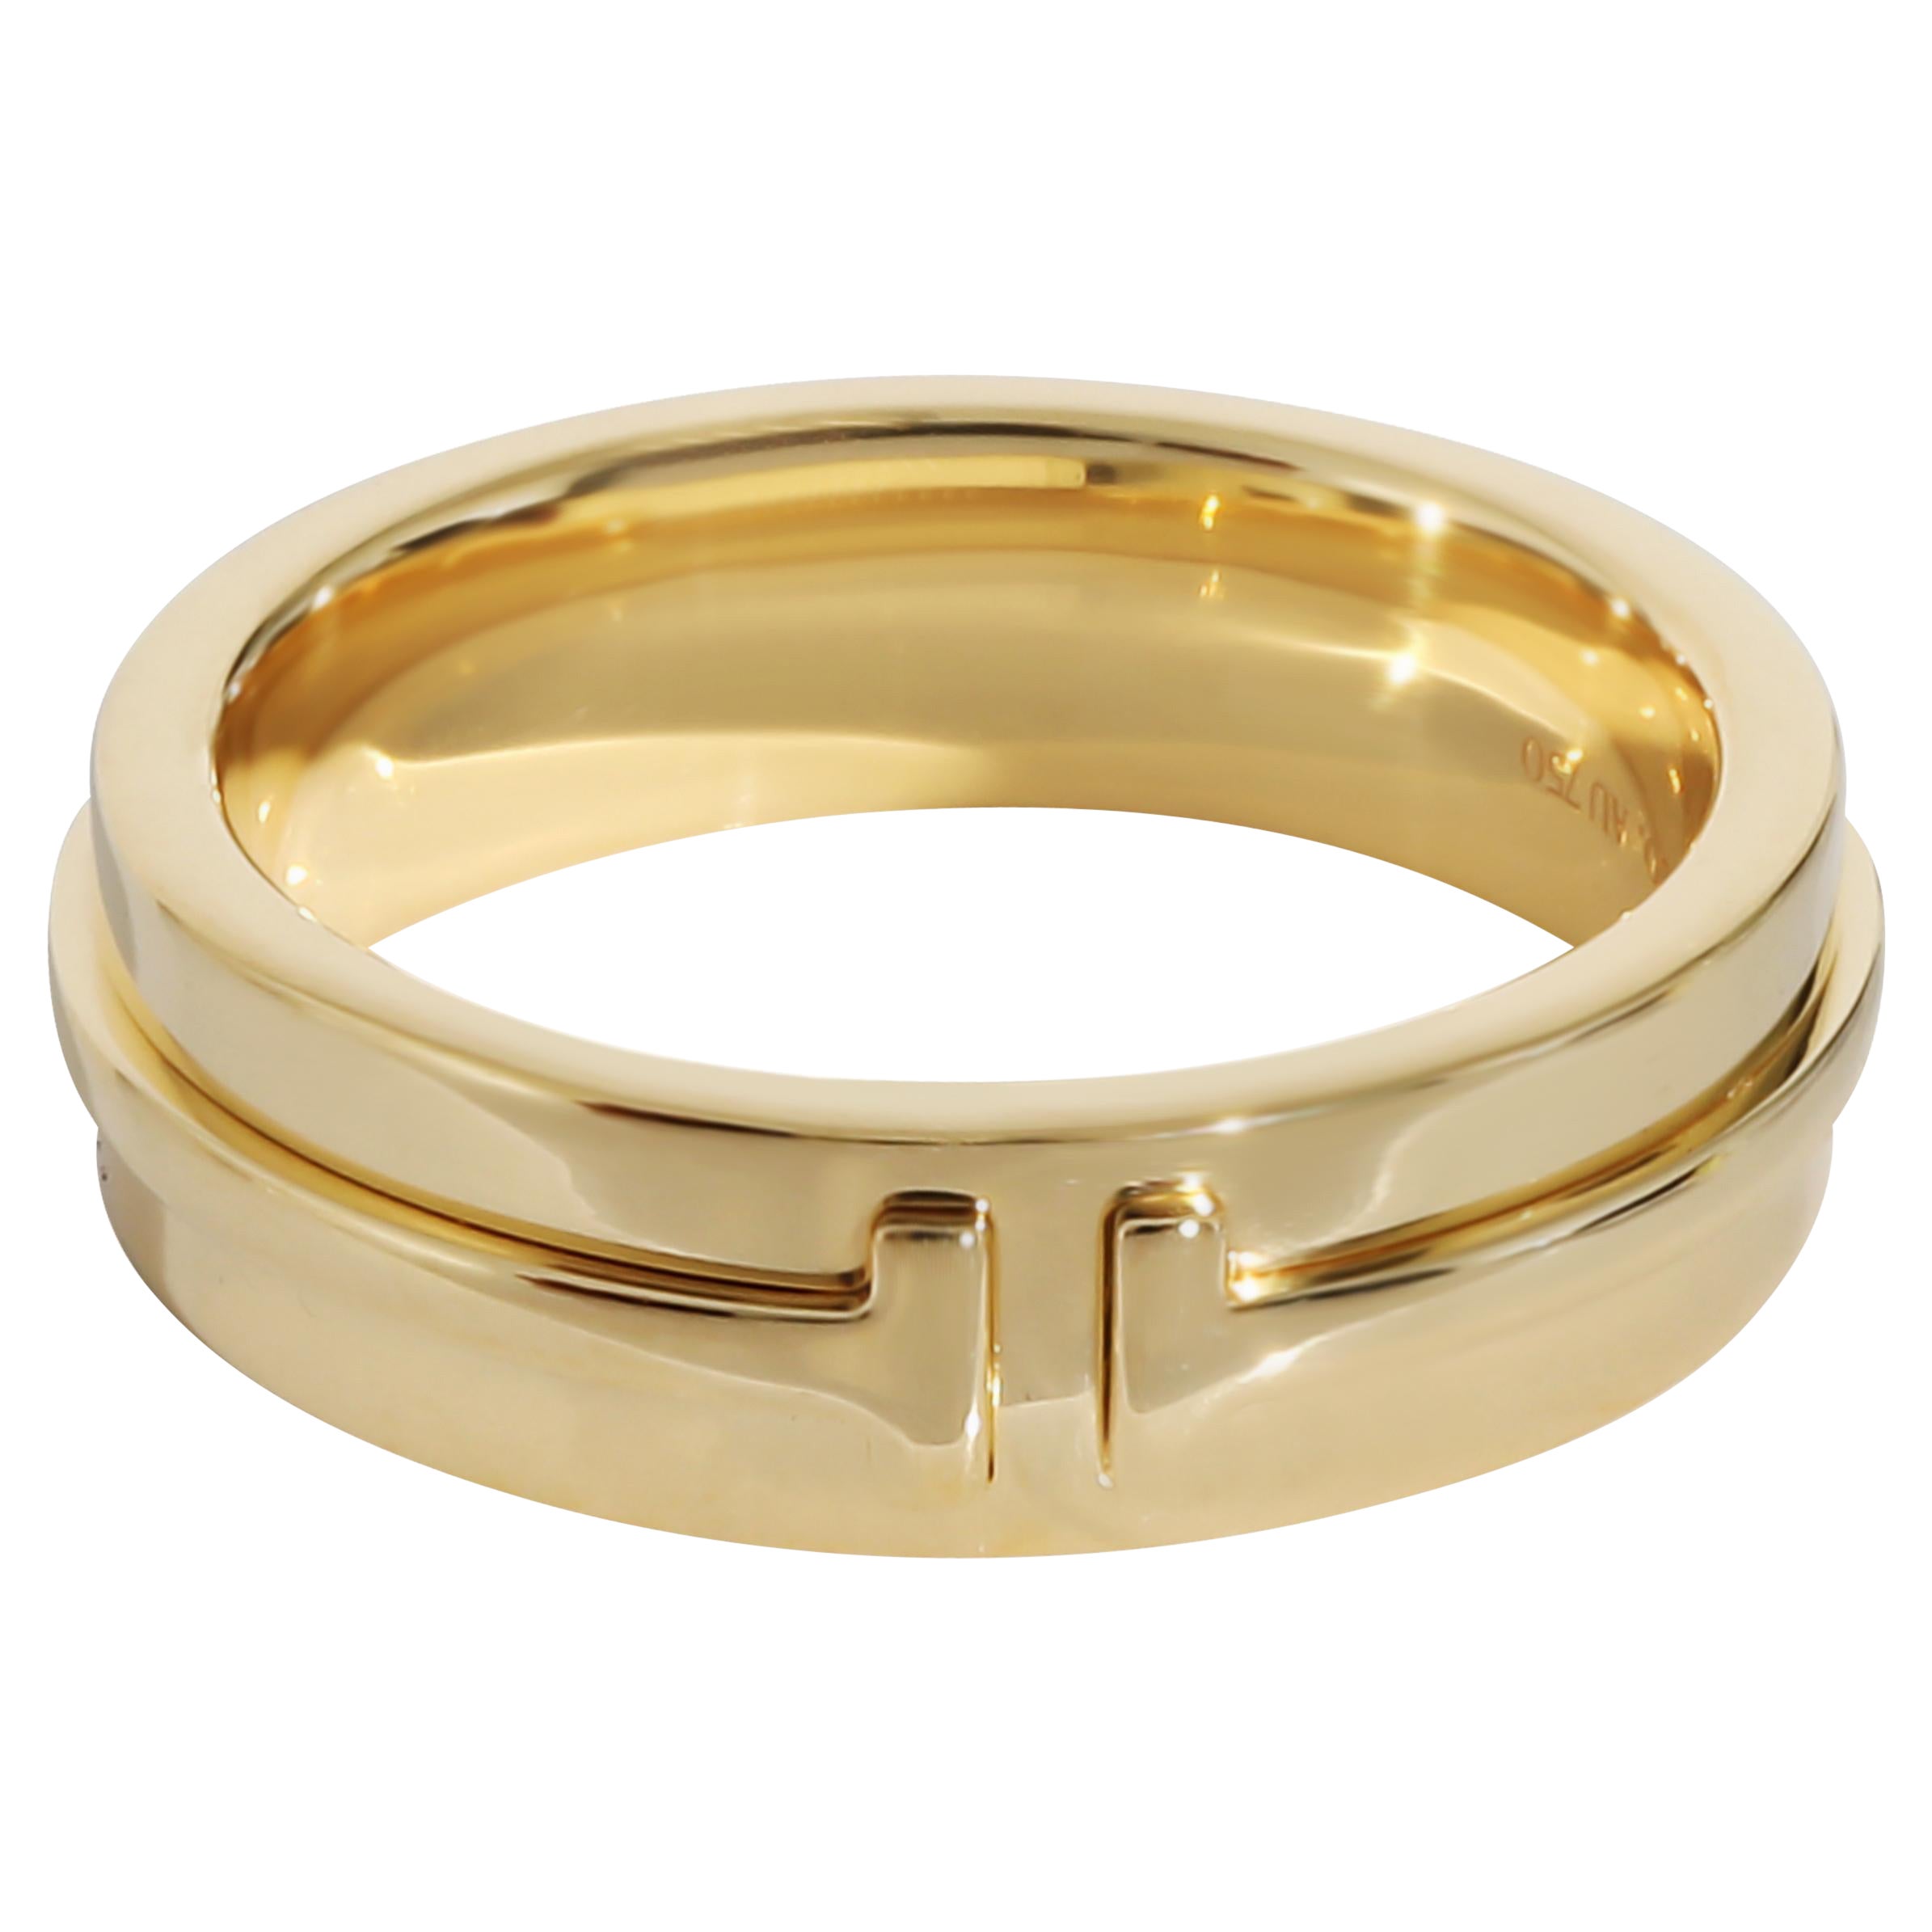 Tiffany & Co. T Wide Ring in 18K Yellow Gold